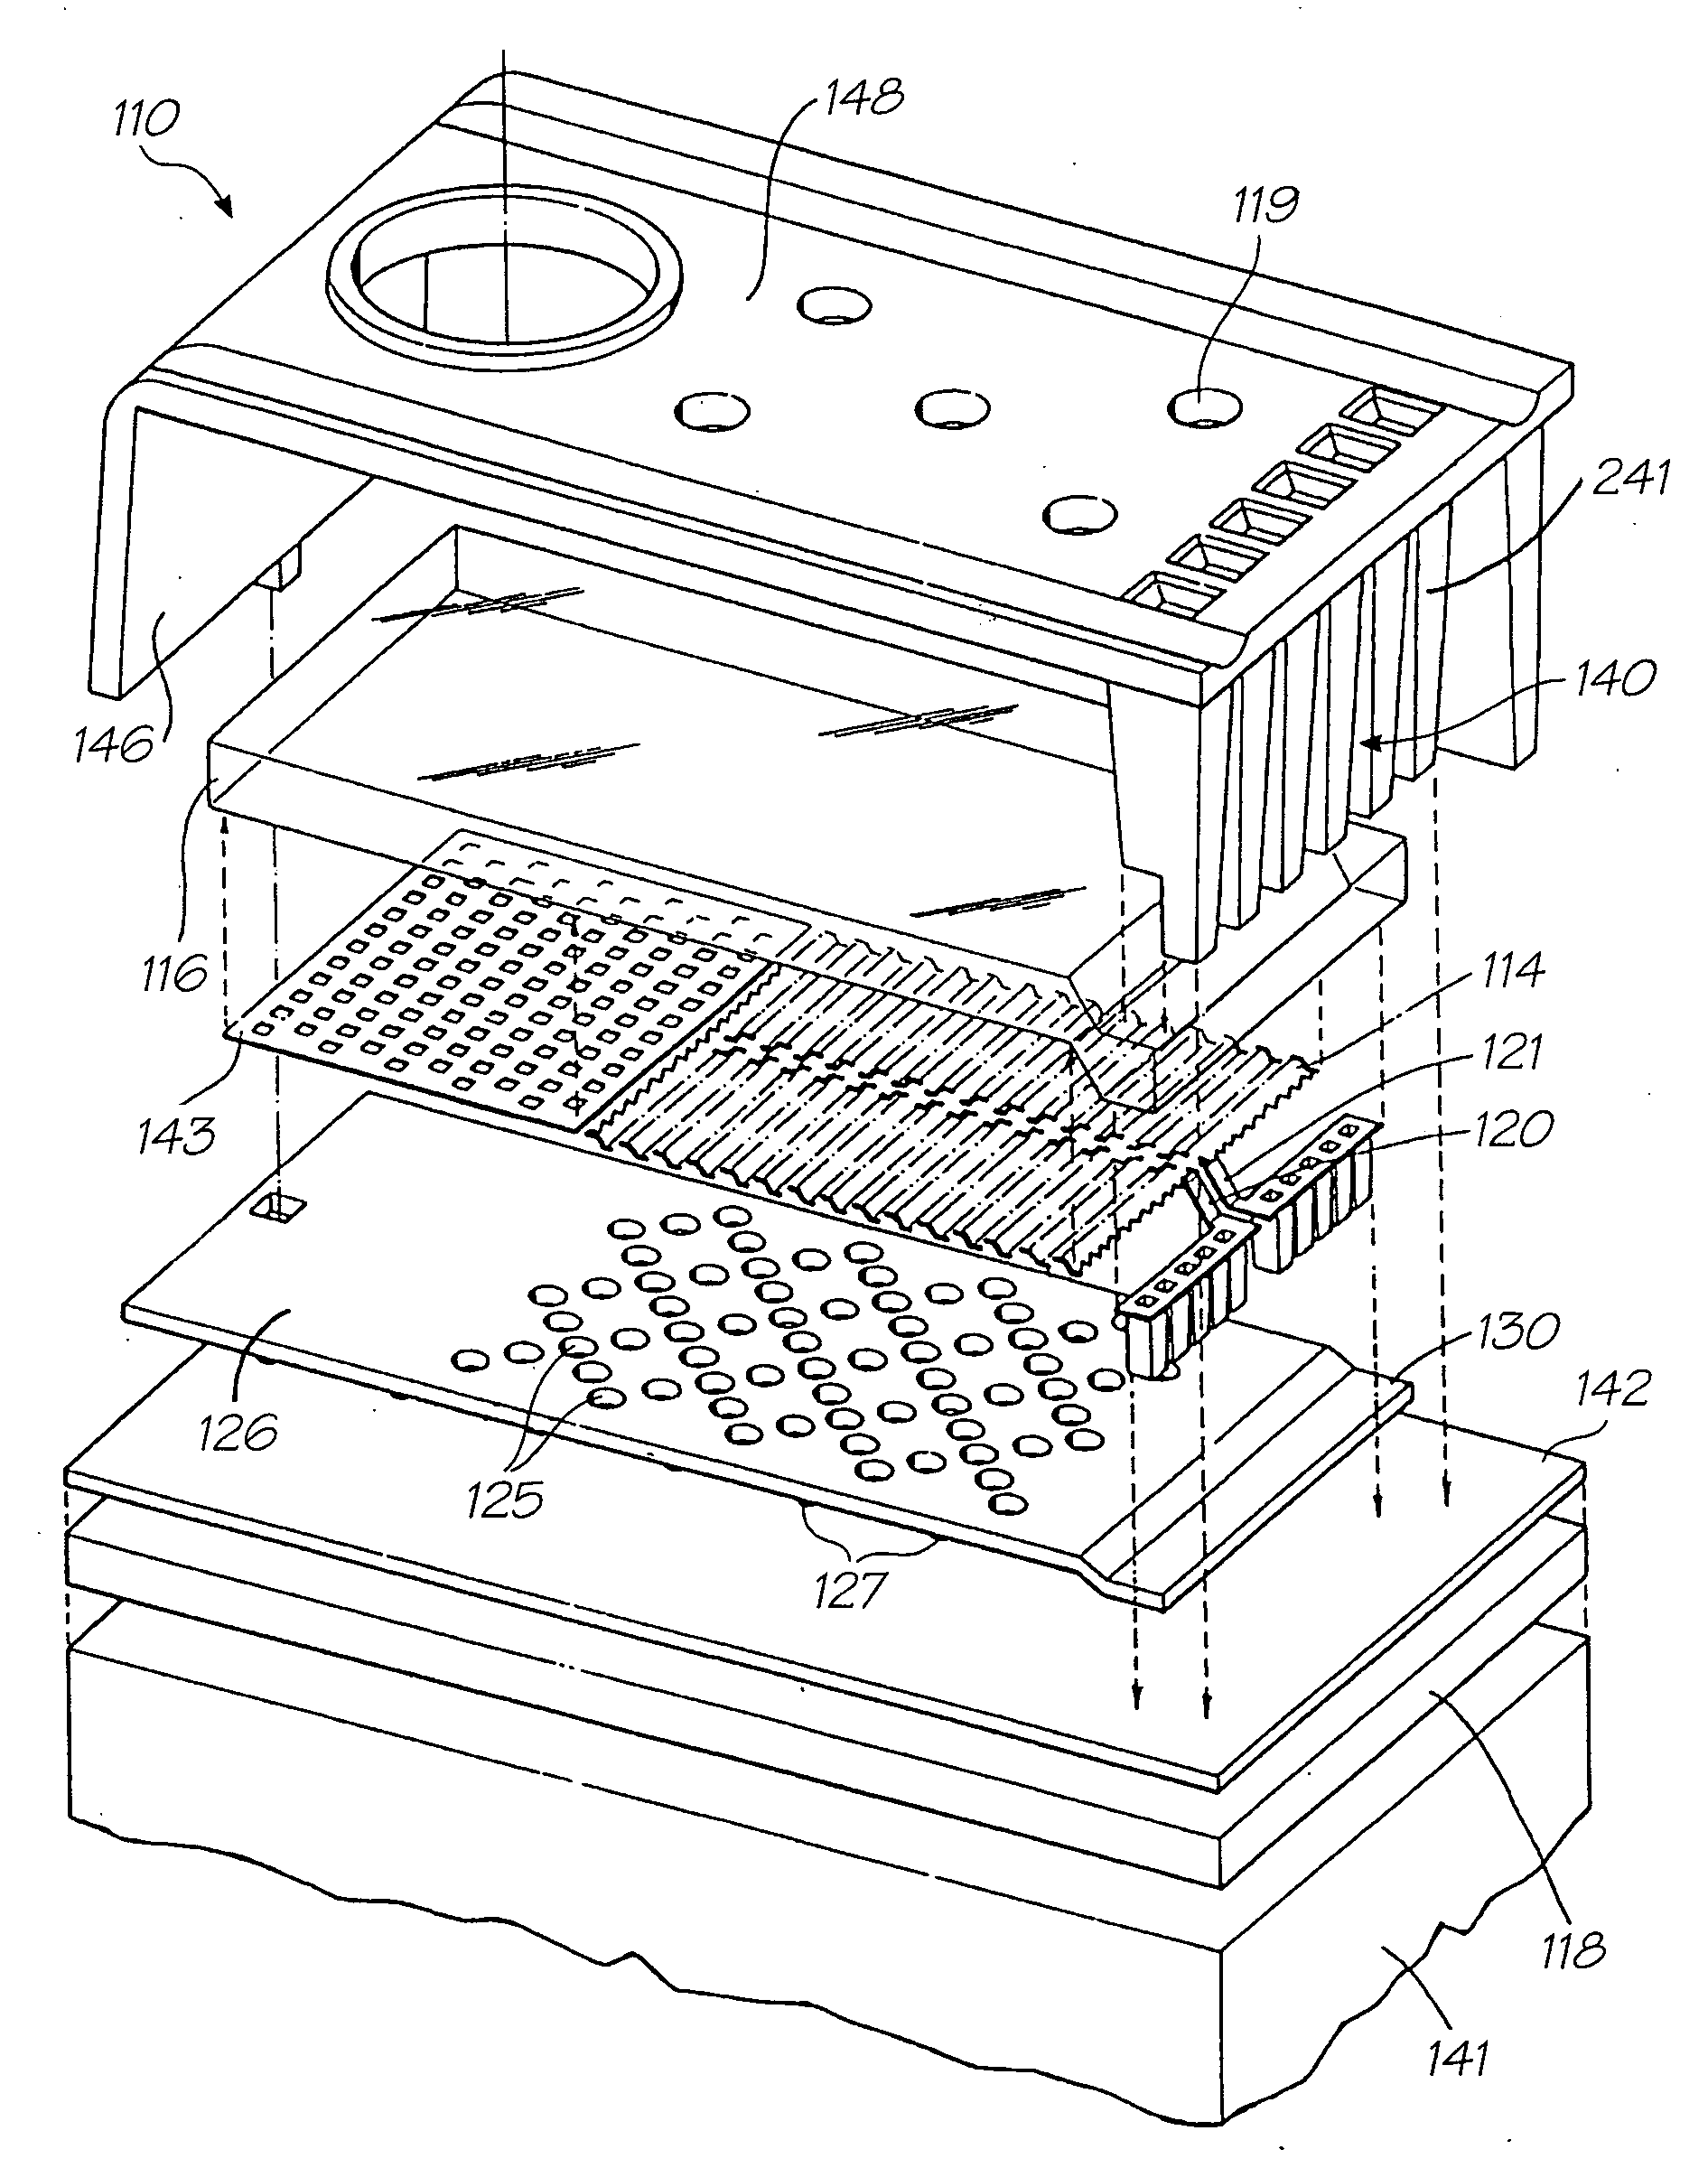 Printhead integrated circuit with small nozzle apertures